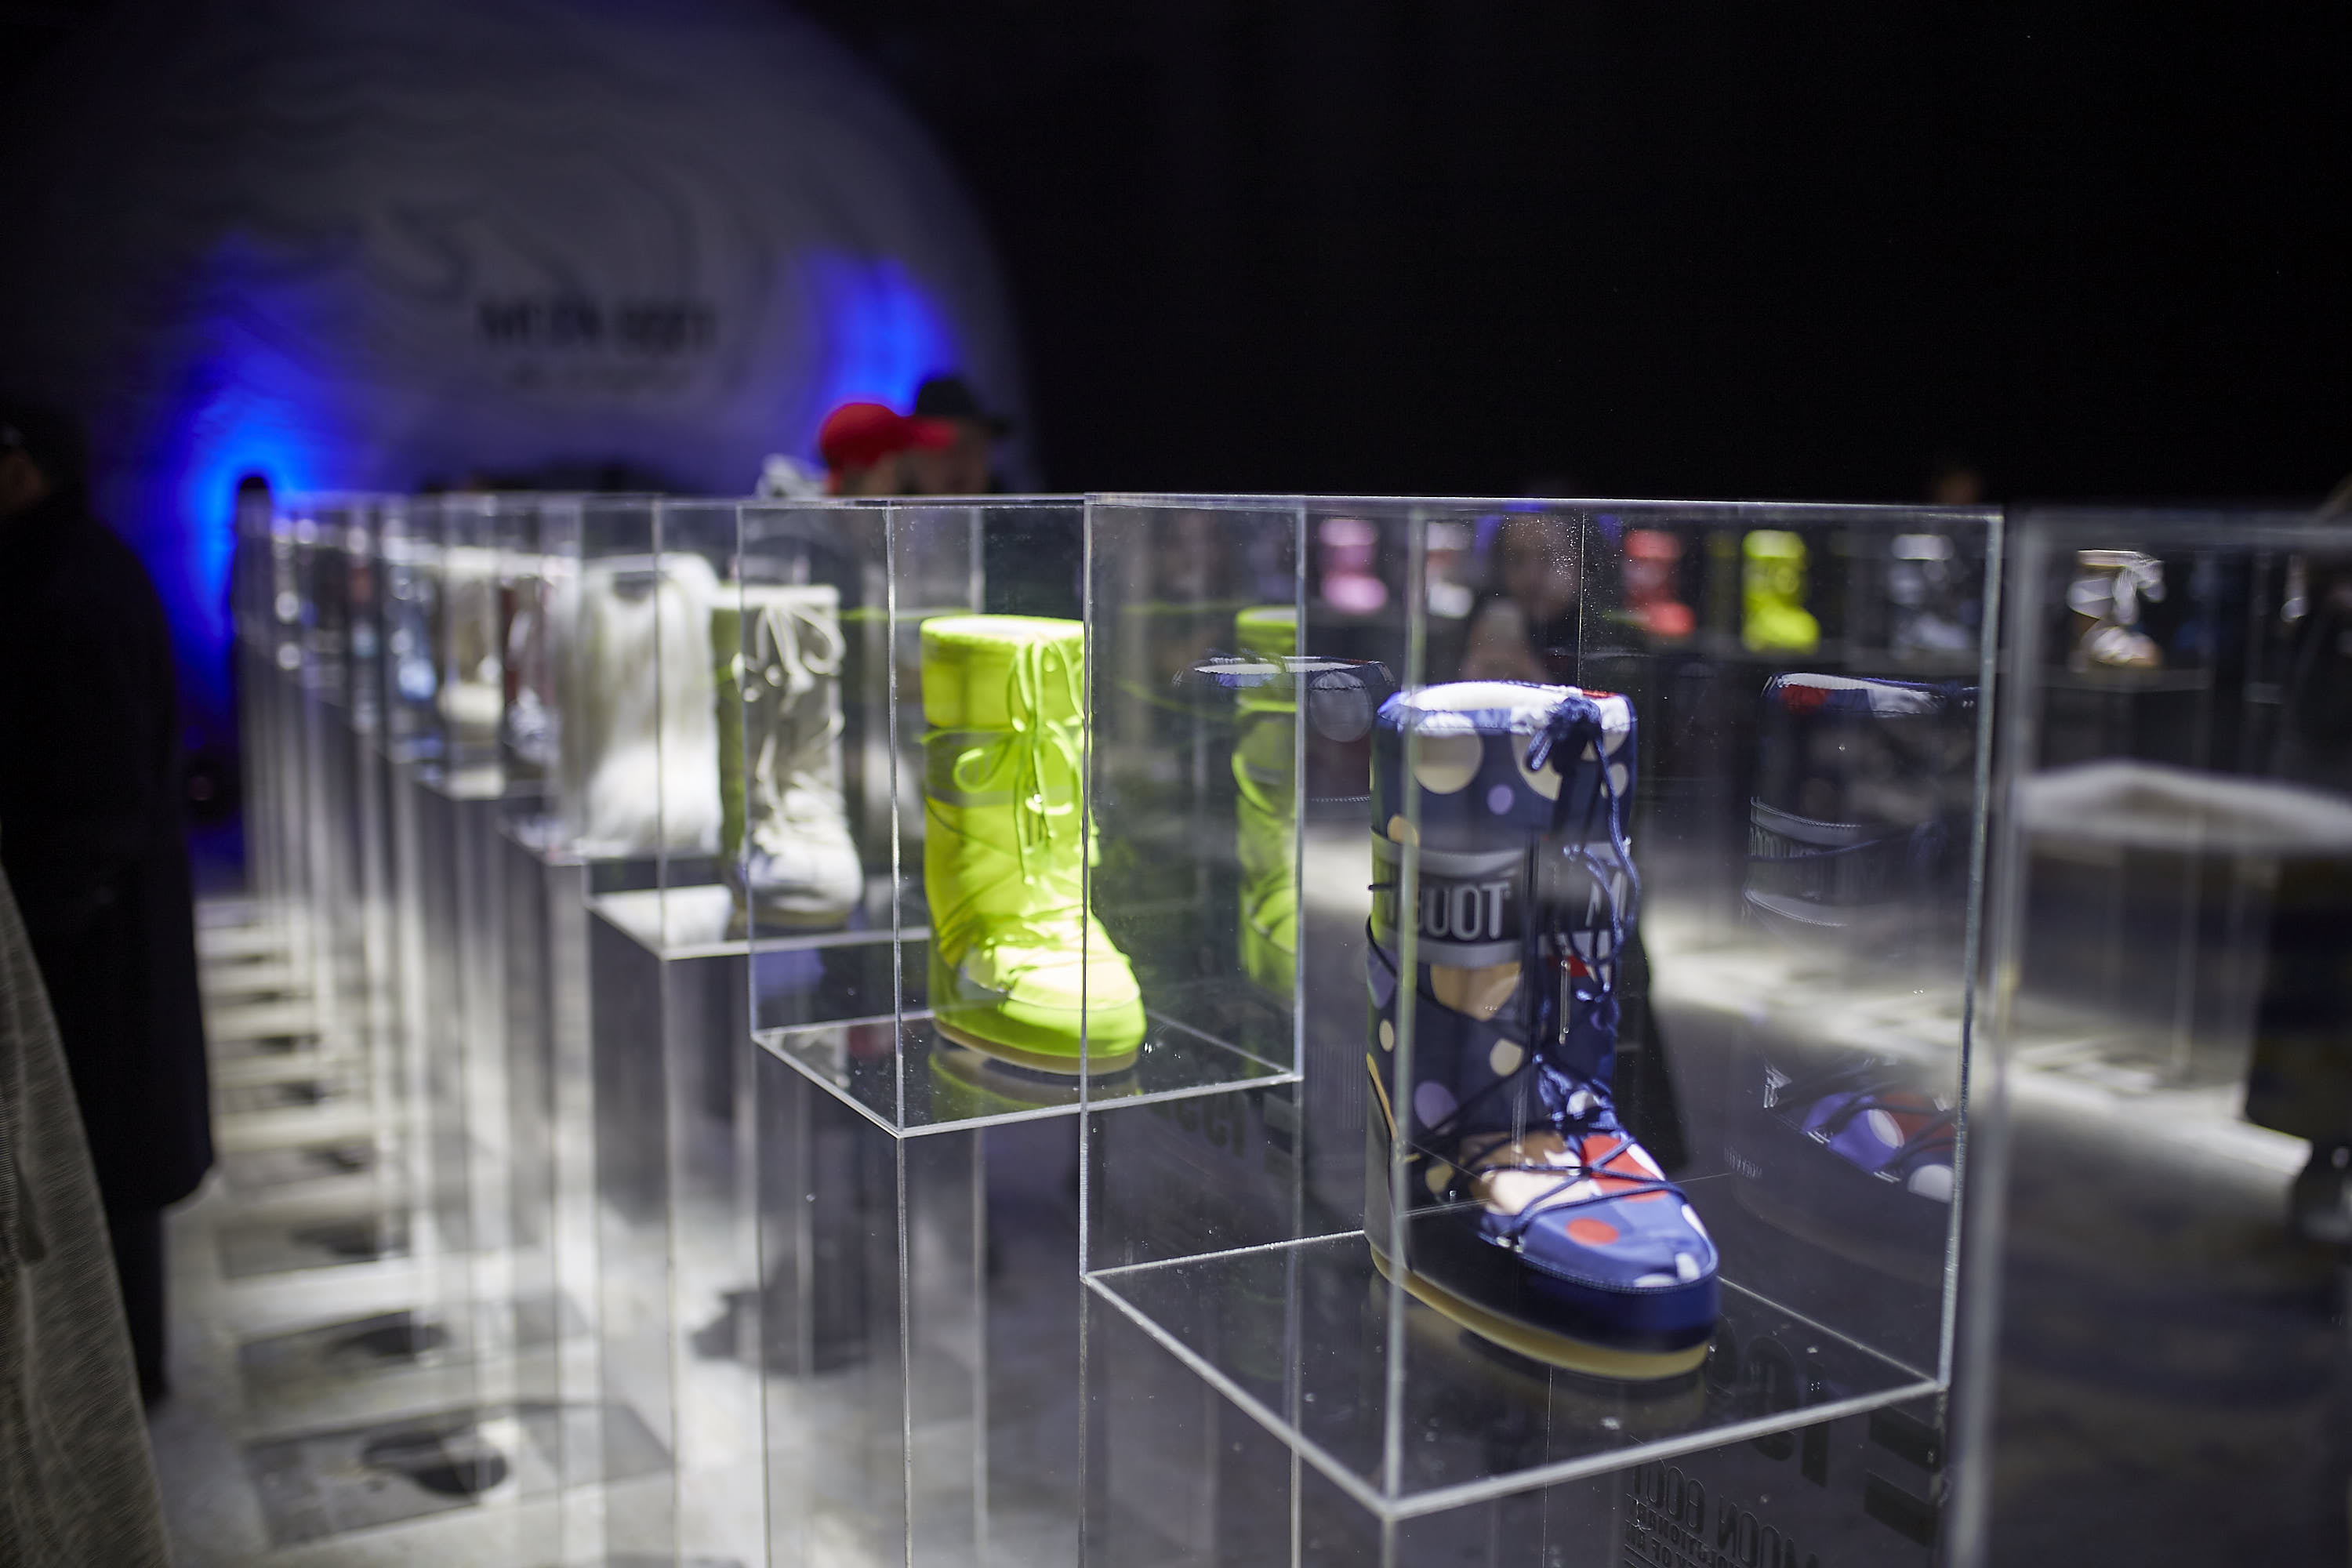 (R)EVOLUTIONARY JOURNEY OF AN ICON. 50 ANNI DI MOON BOOT